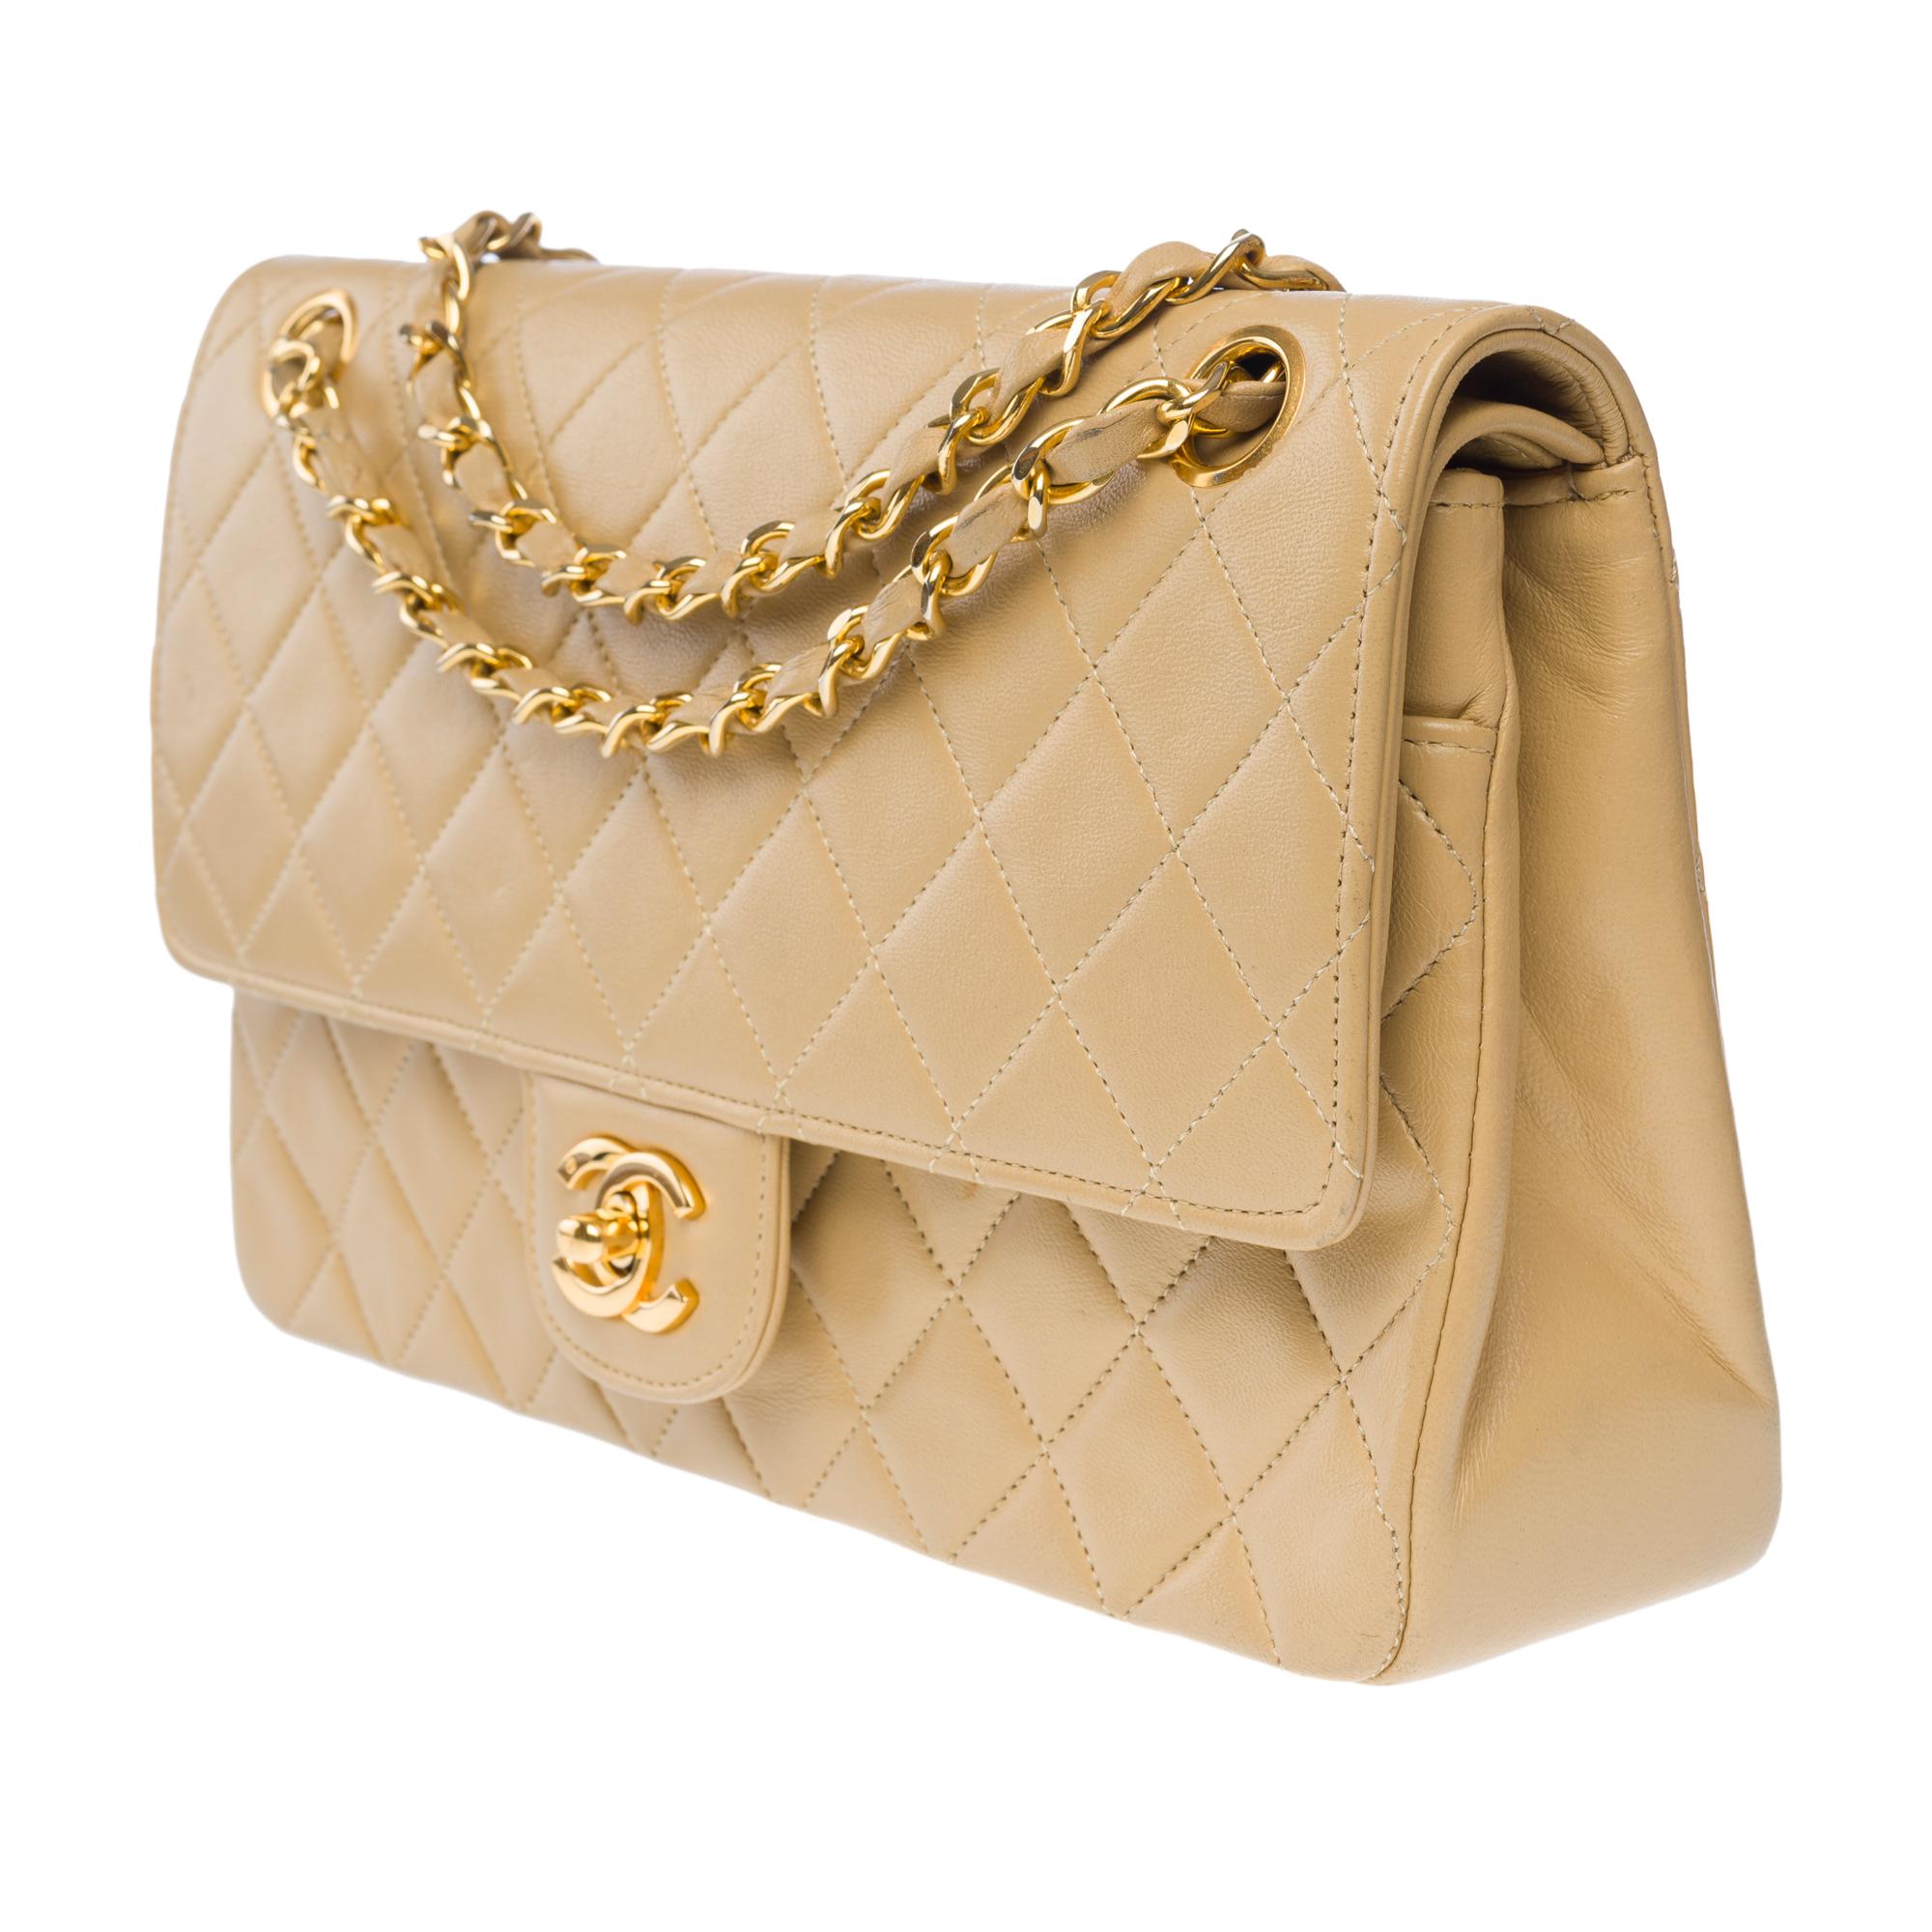 Women's Chanel Timeless double flap shoulder bag in beige quilted lambskin leather, GHW